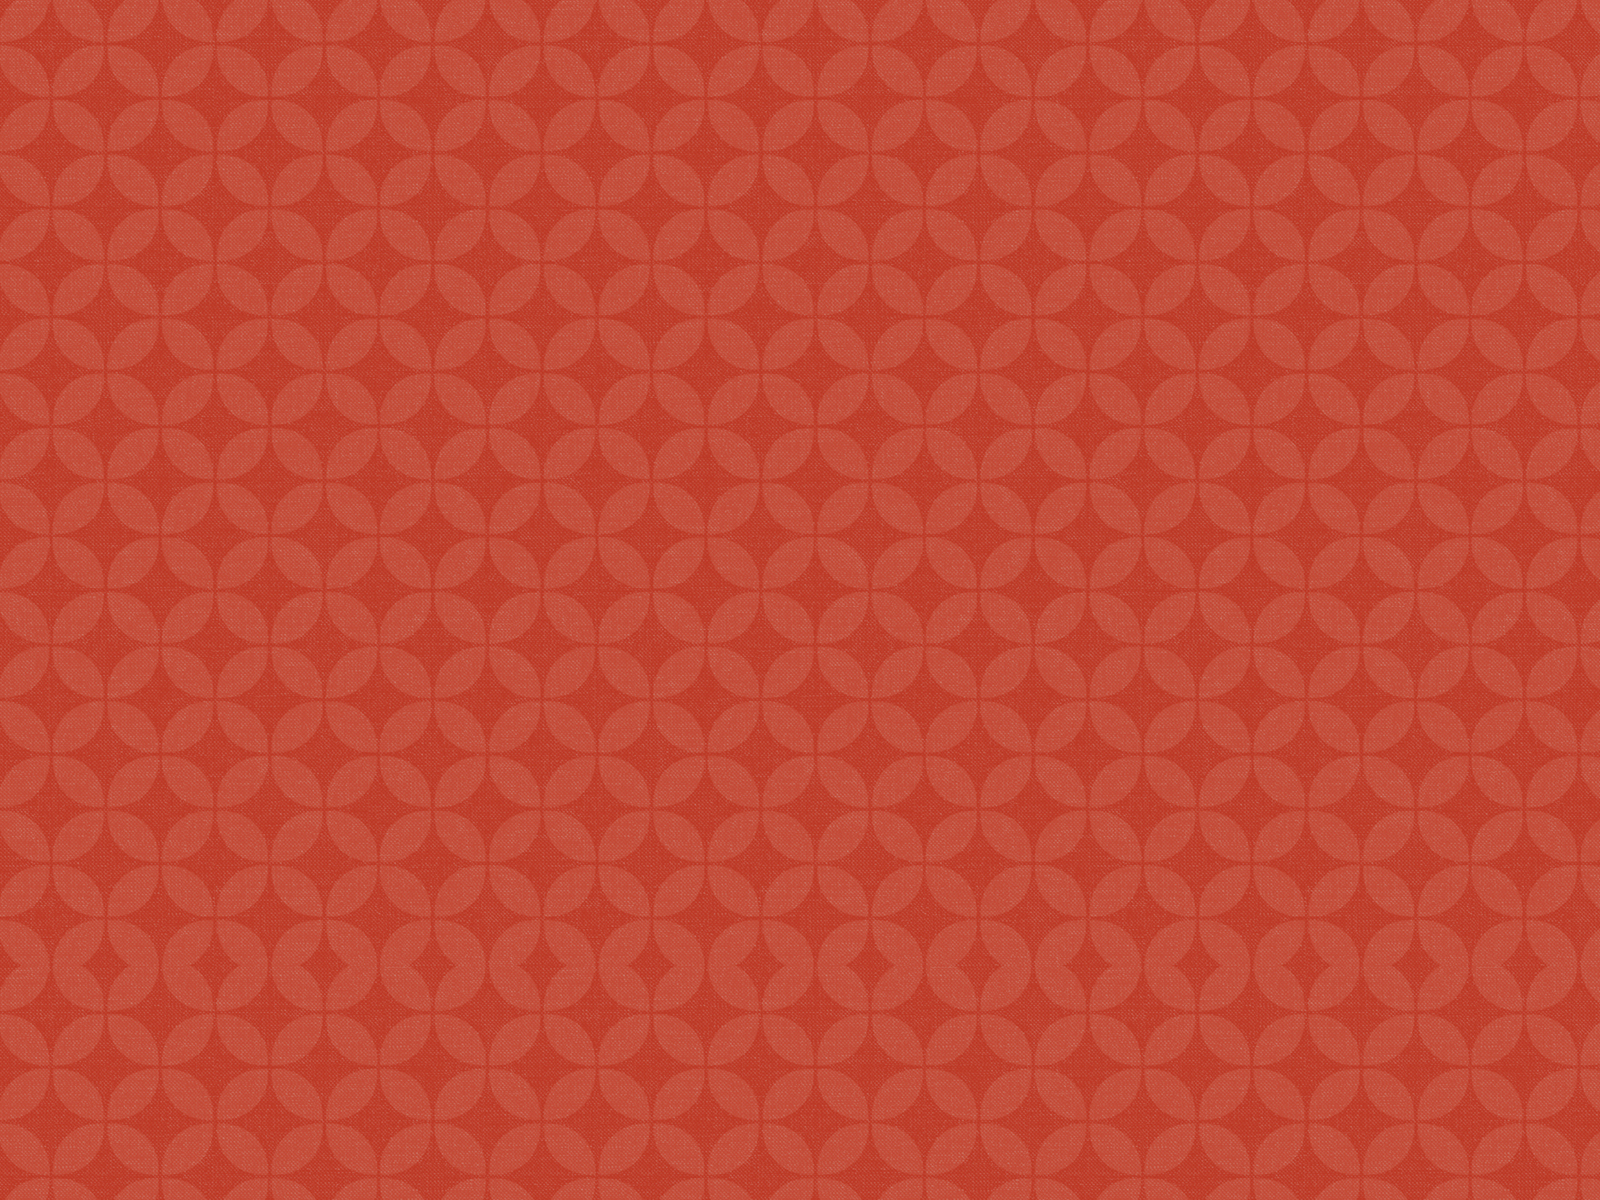 Fabric Texture backgrounds